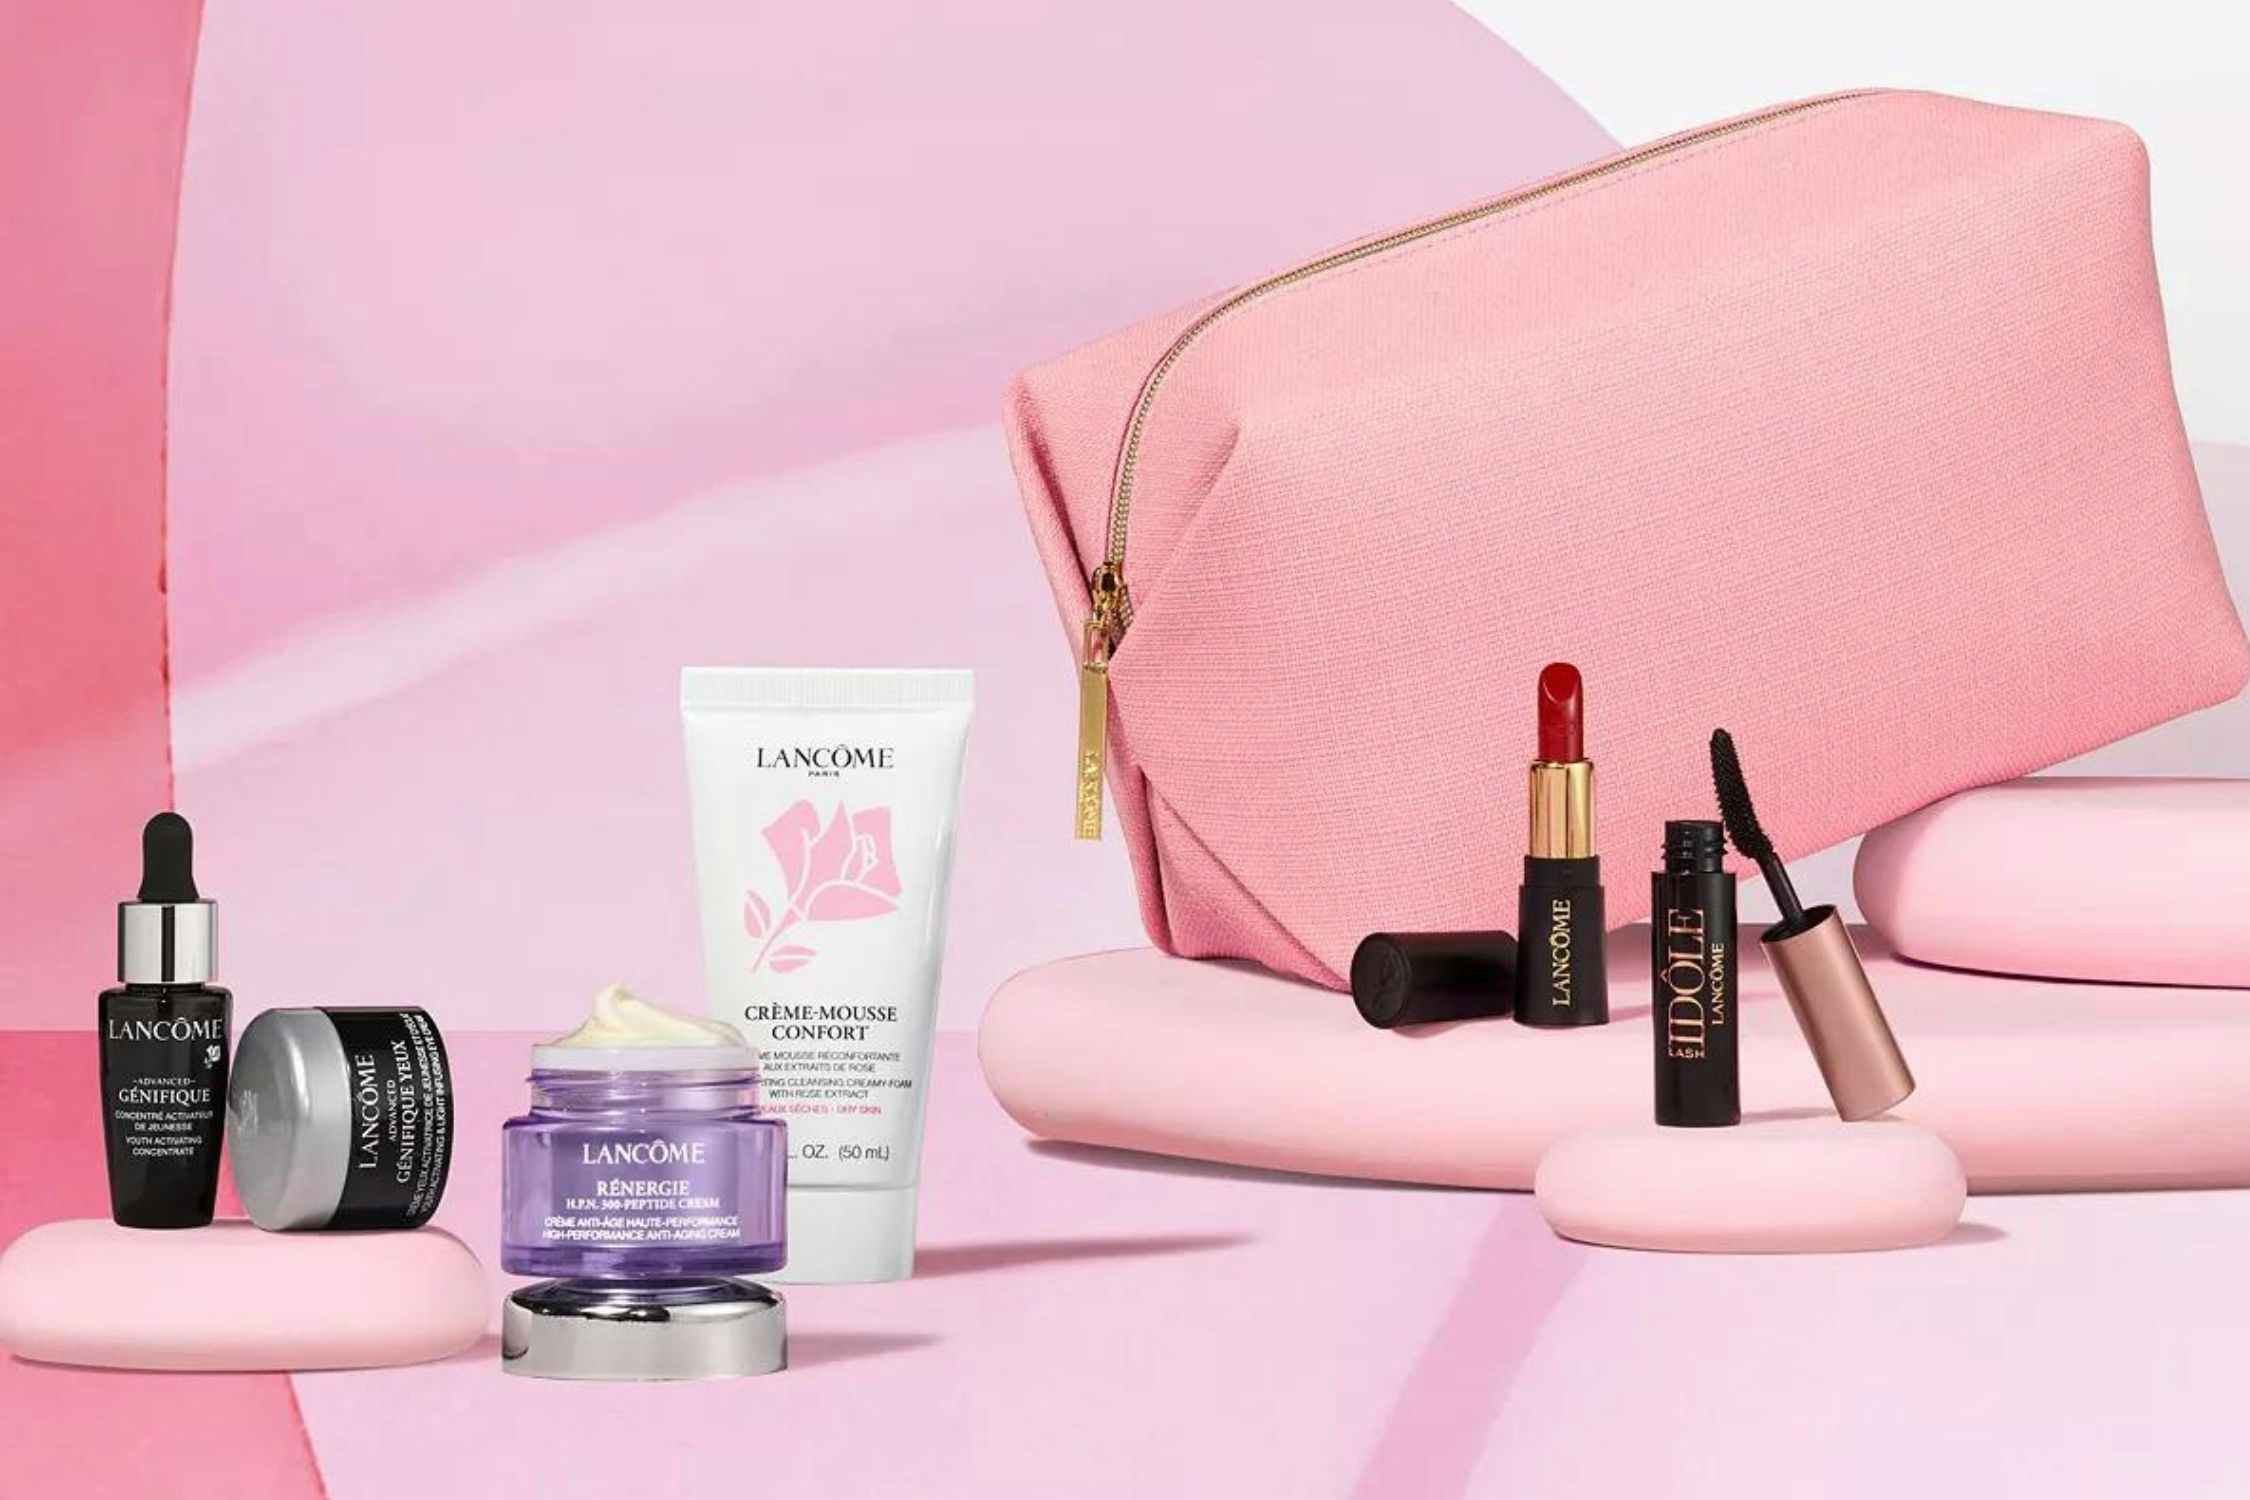 Get $177 Worth of Lancome Beauty Products Free With $40+ Purchase at Macy's